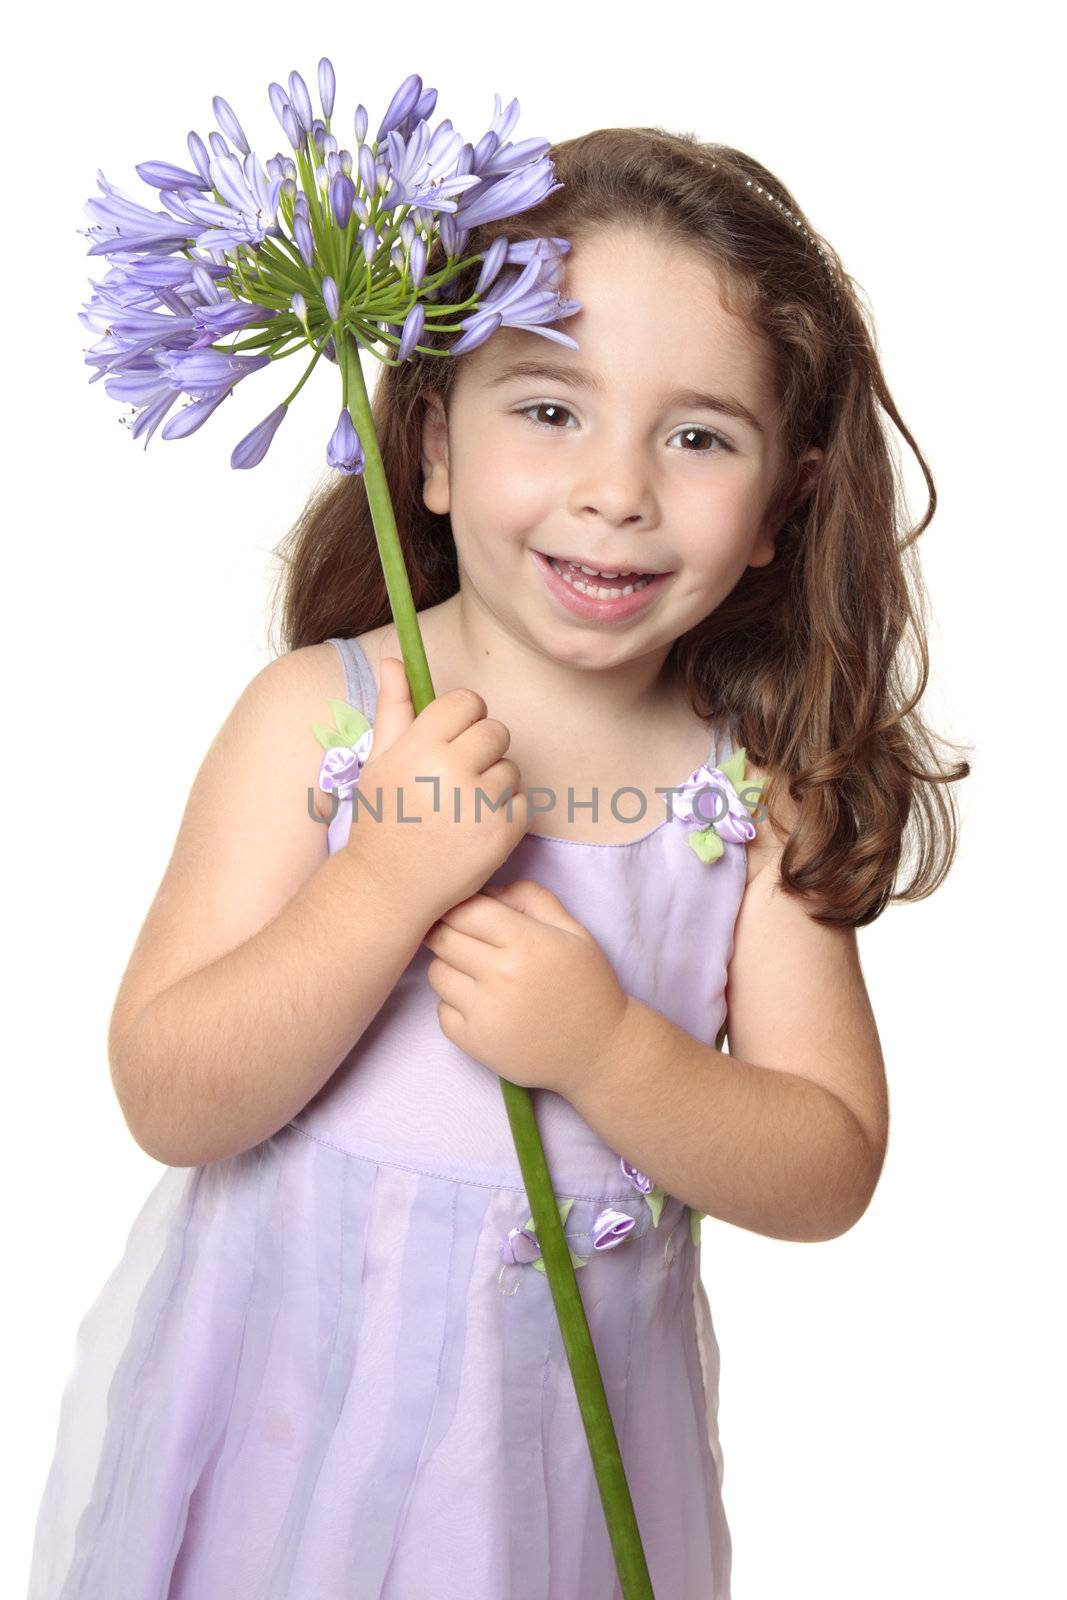 Pretty girl dressed in a beautiful mauve dress is holding a large agapanthus flower and smiling with pure joy.